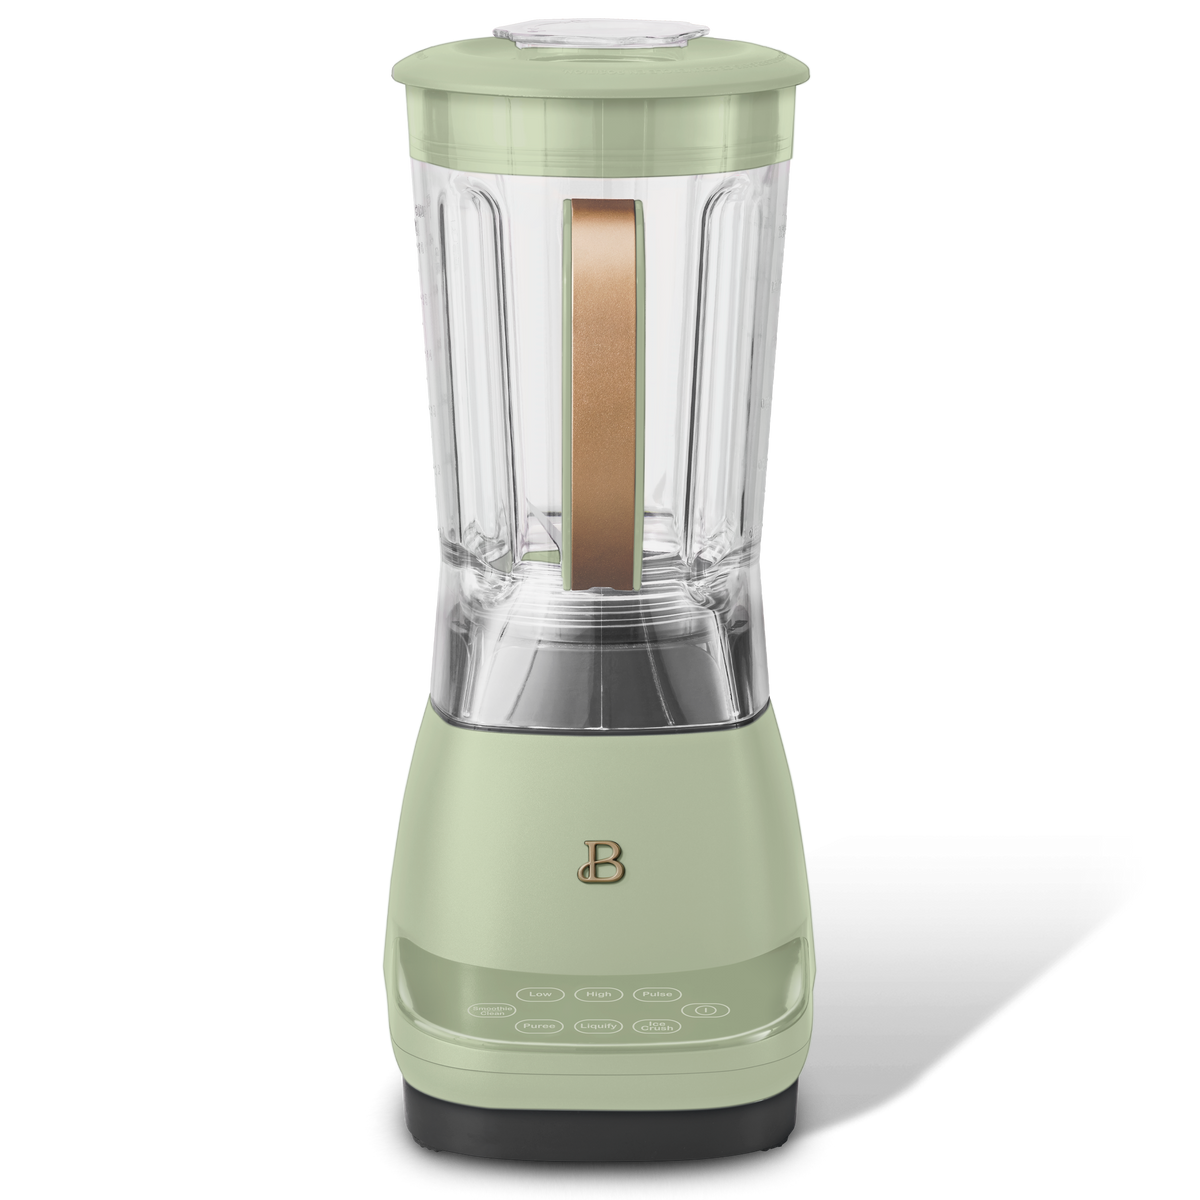 E8430.HD - 1 Liter Two Speed Blender with Timer - Eberbach Corporation